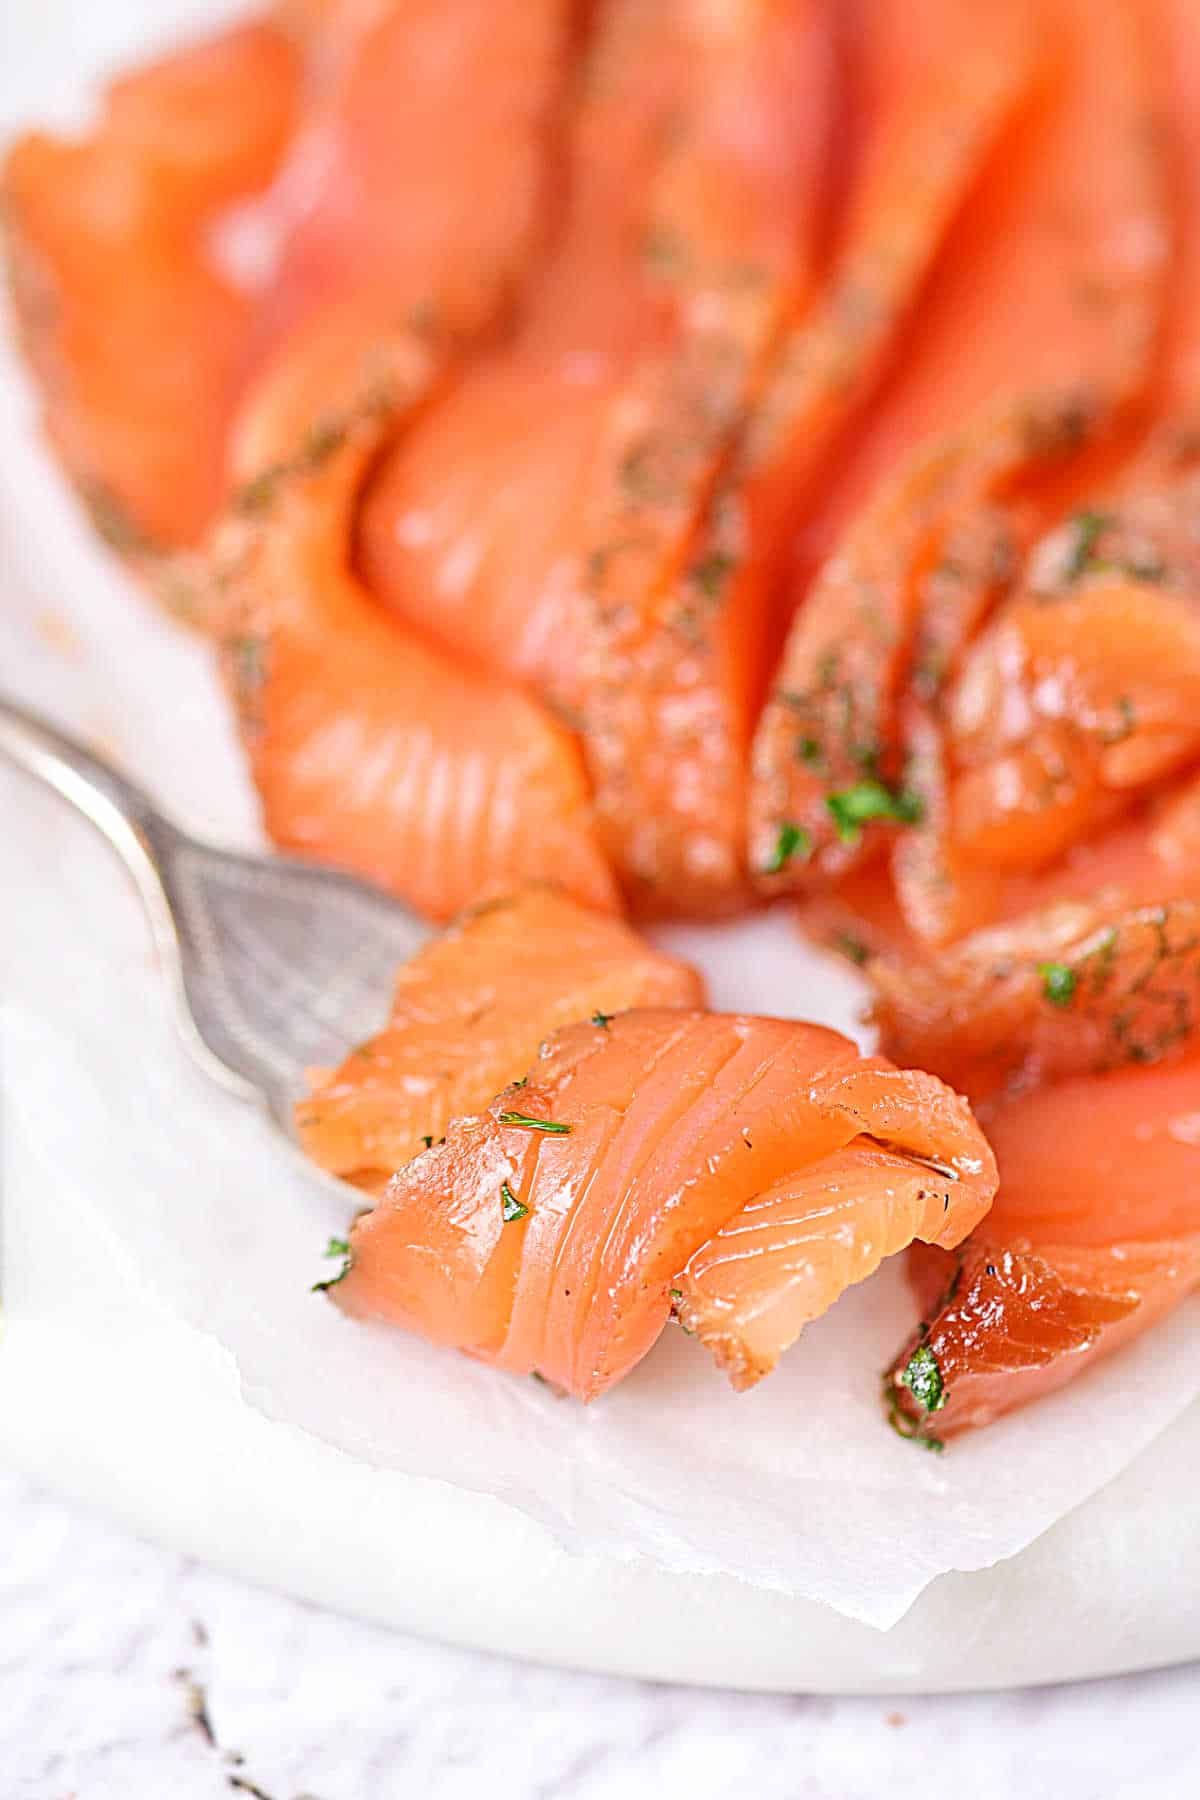 Bite of smoked salmon wrapped on a silver fork on a white plate with more salmon.